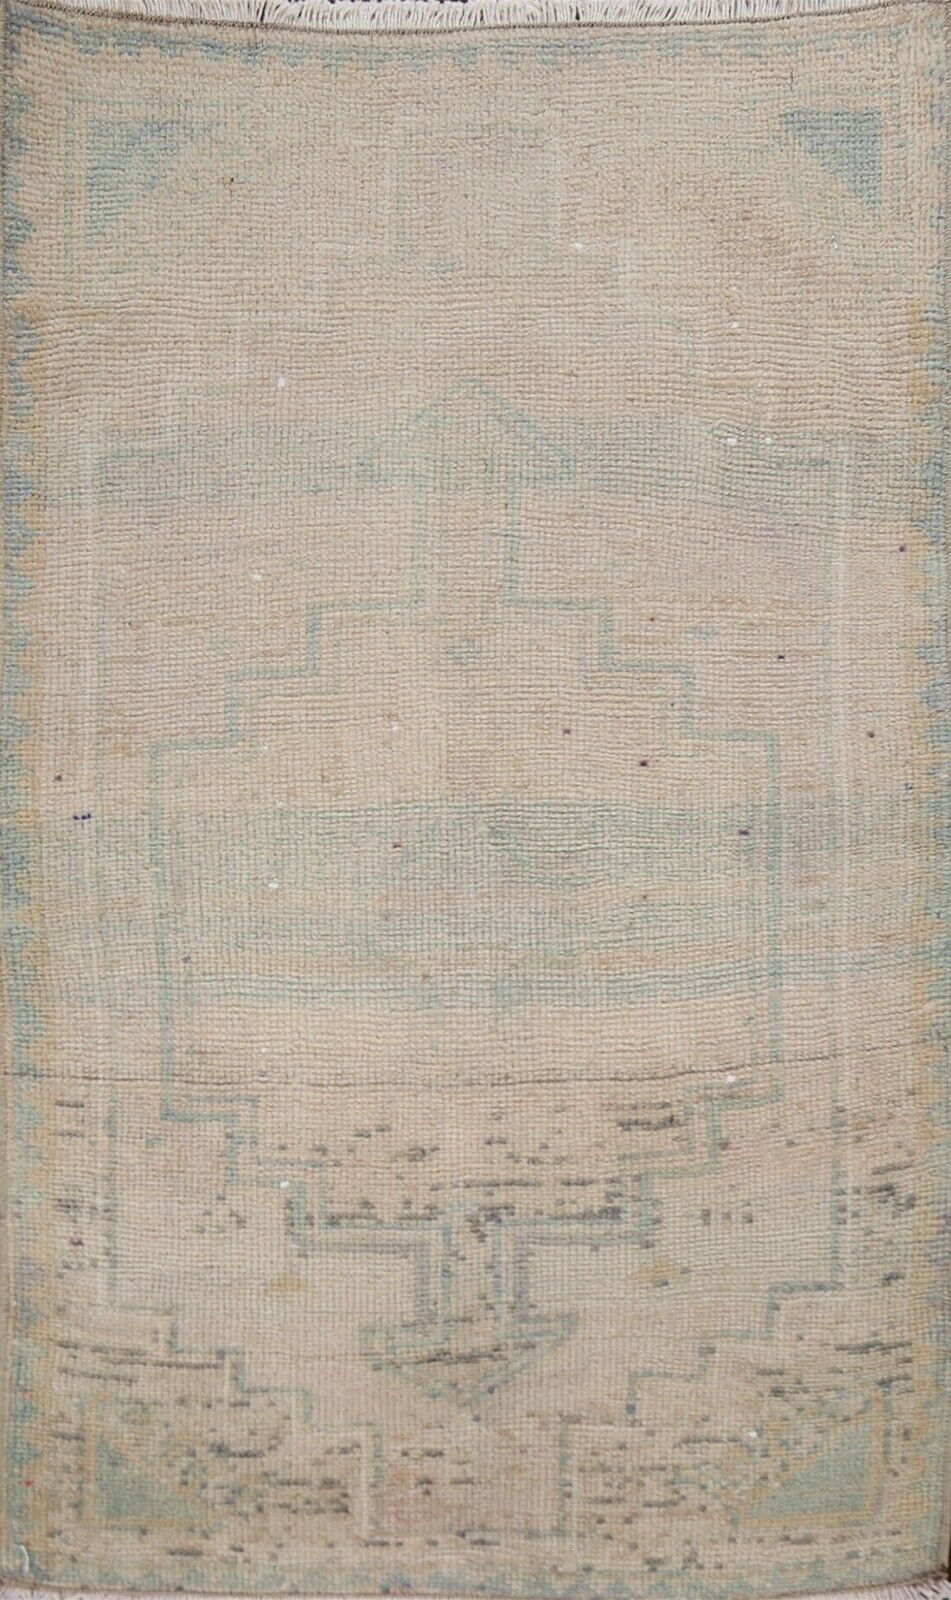 Vintage Muted Tribal Oushak Turkish Geometric Area Rug Hand-knotted 2'x3' Carpet